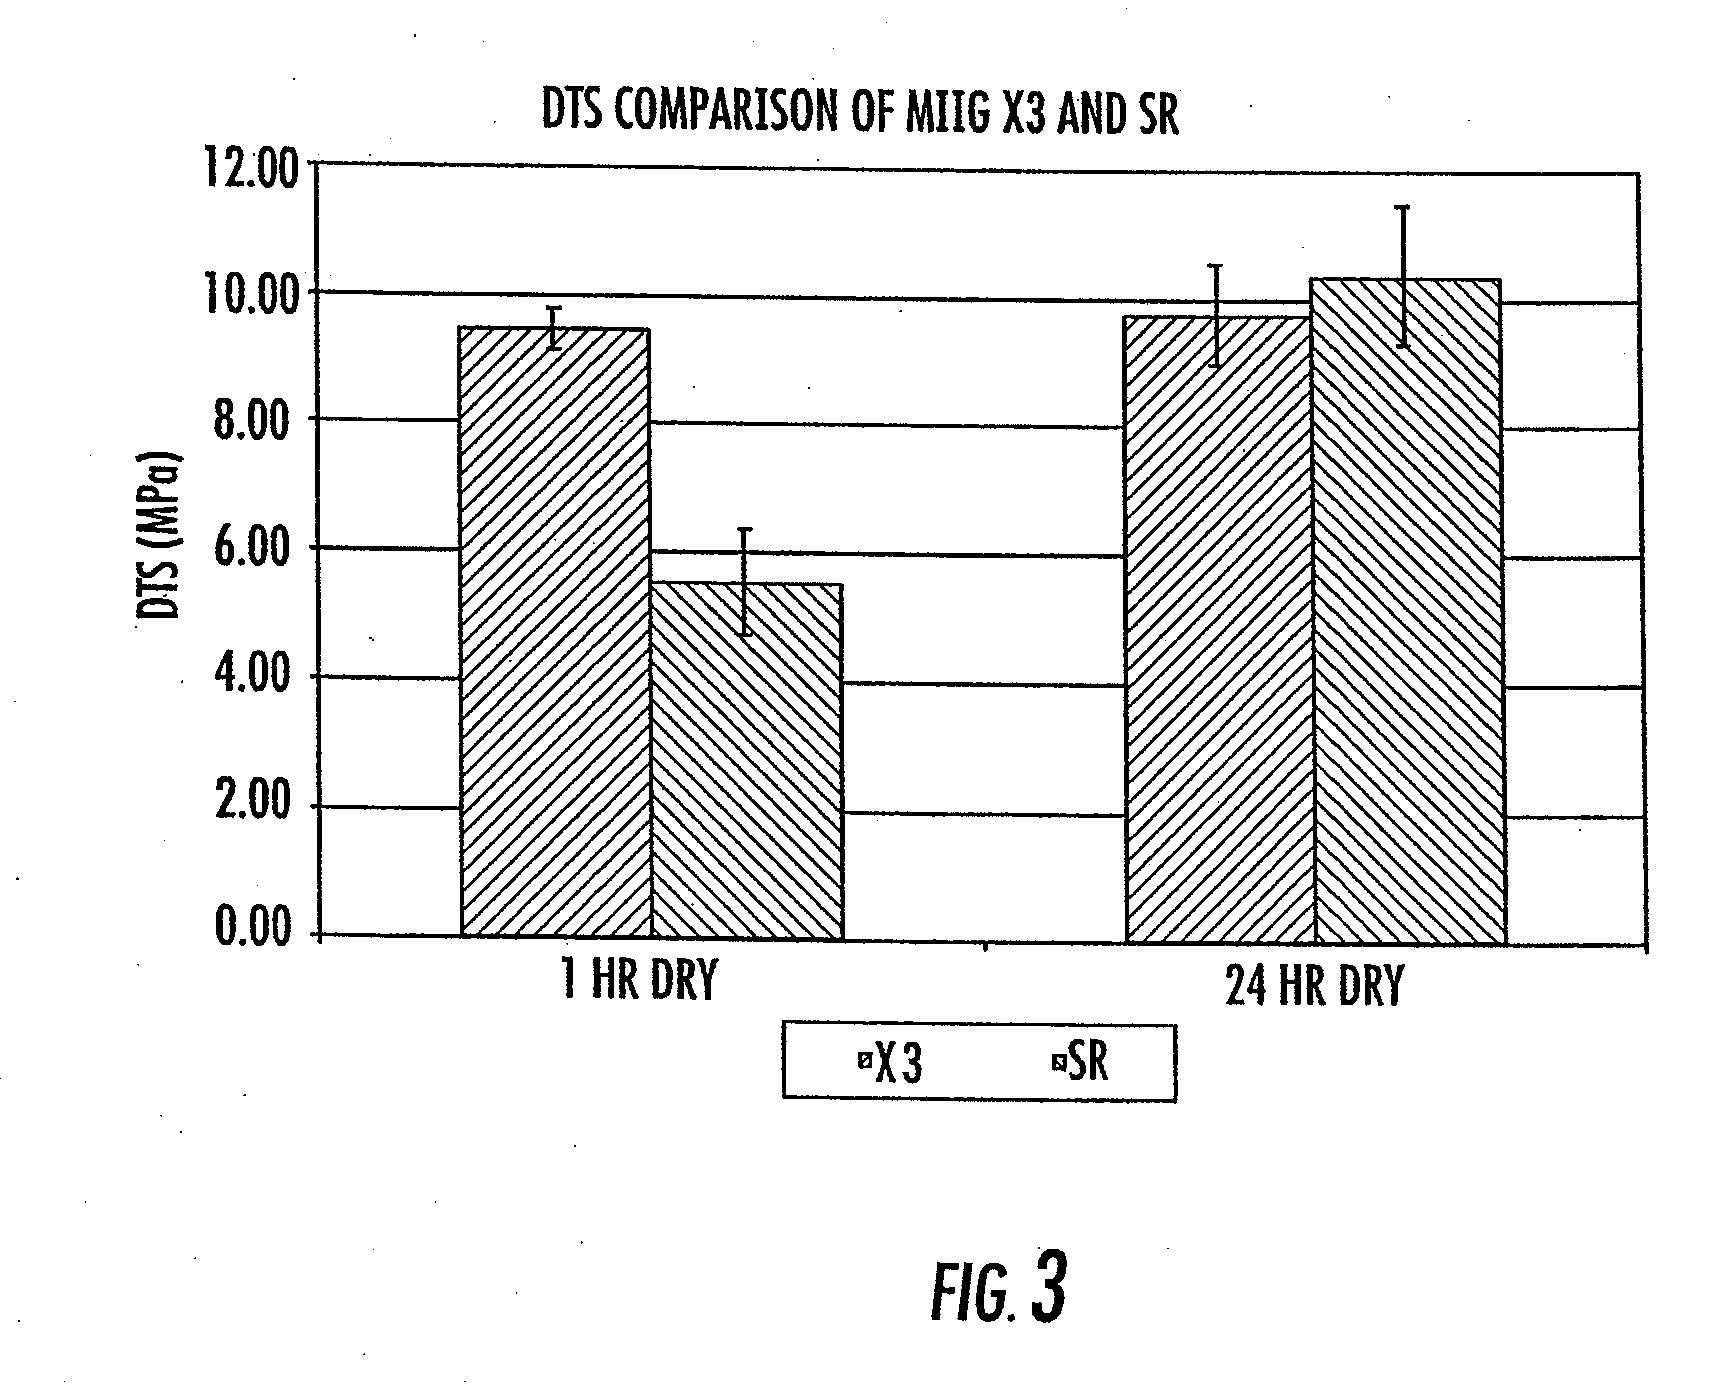 Composite Bone Graft Substitute Cement and Articles Produced Therefrom